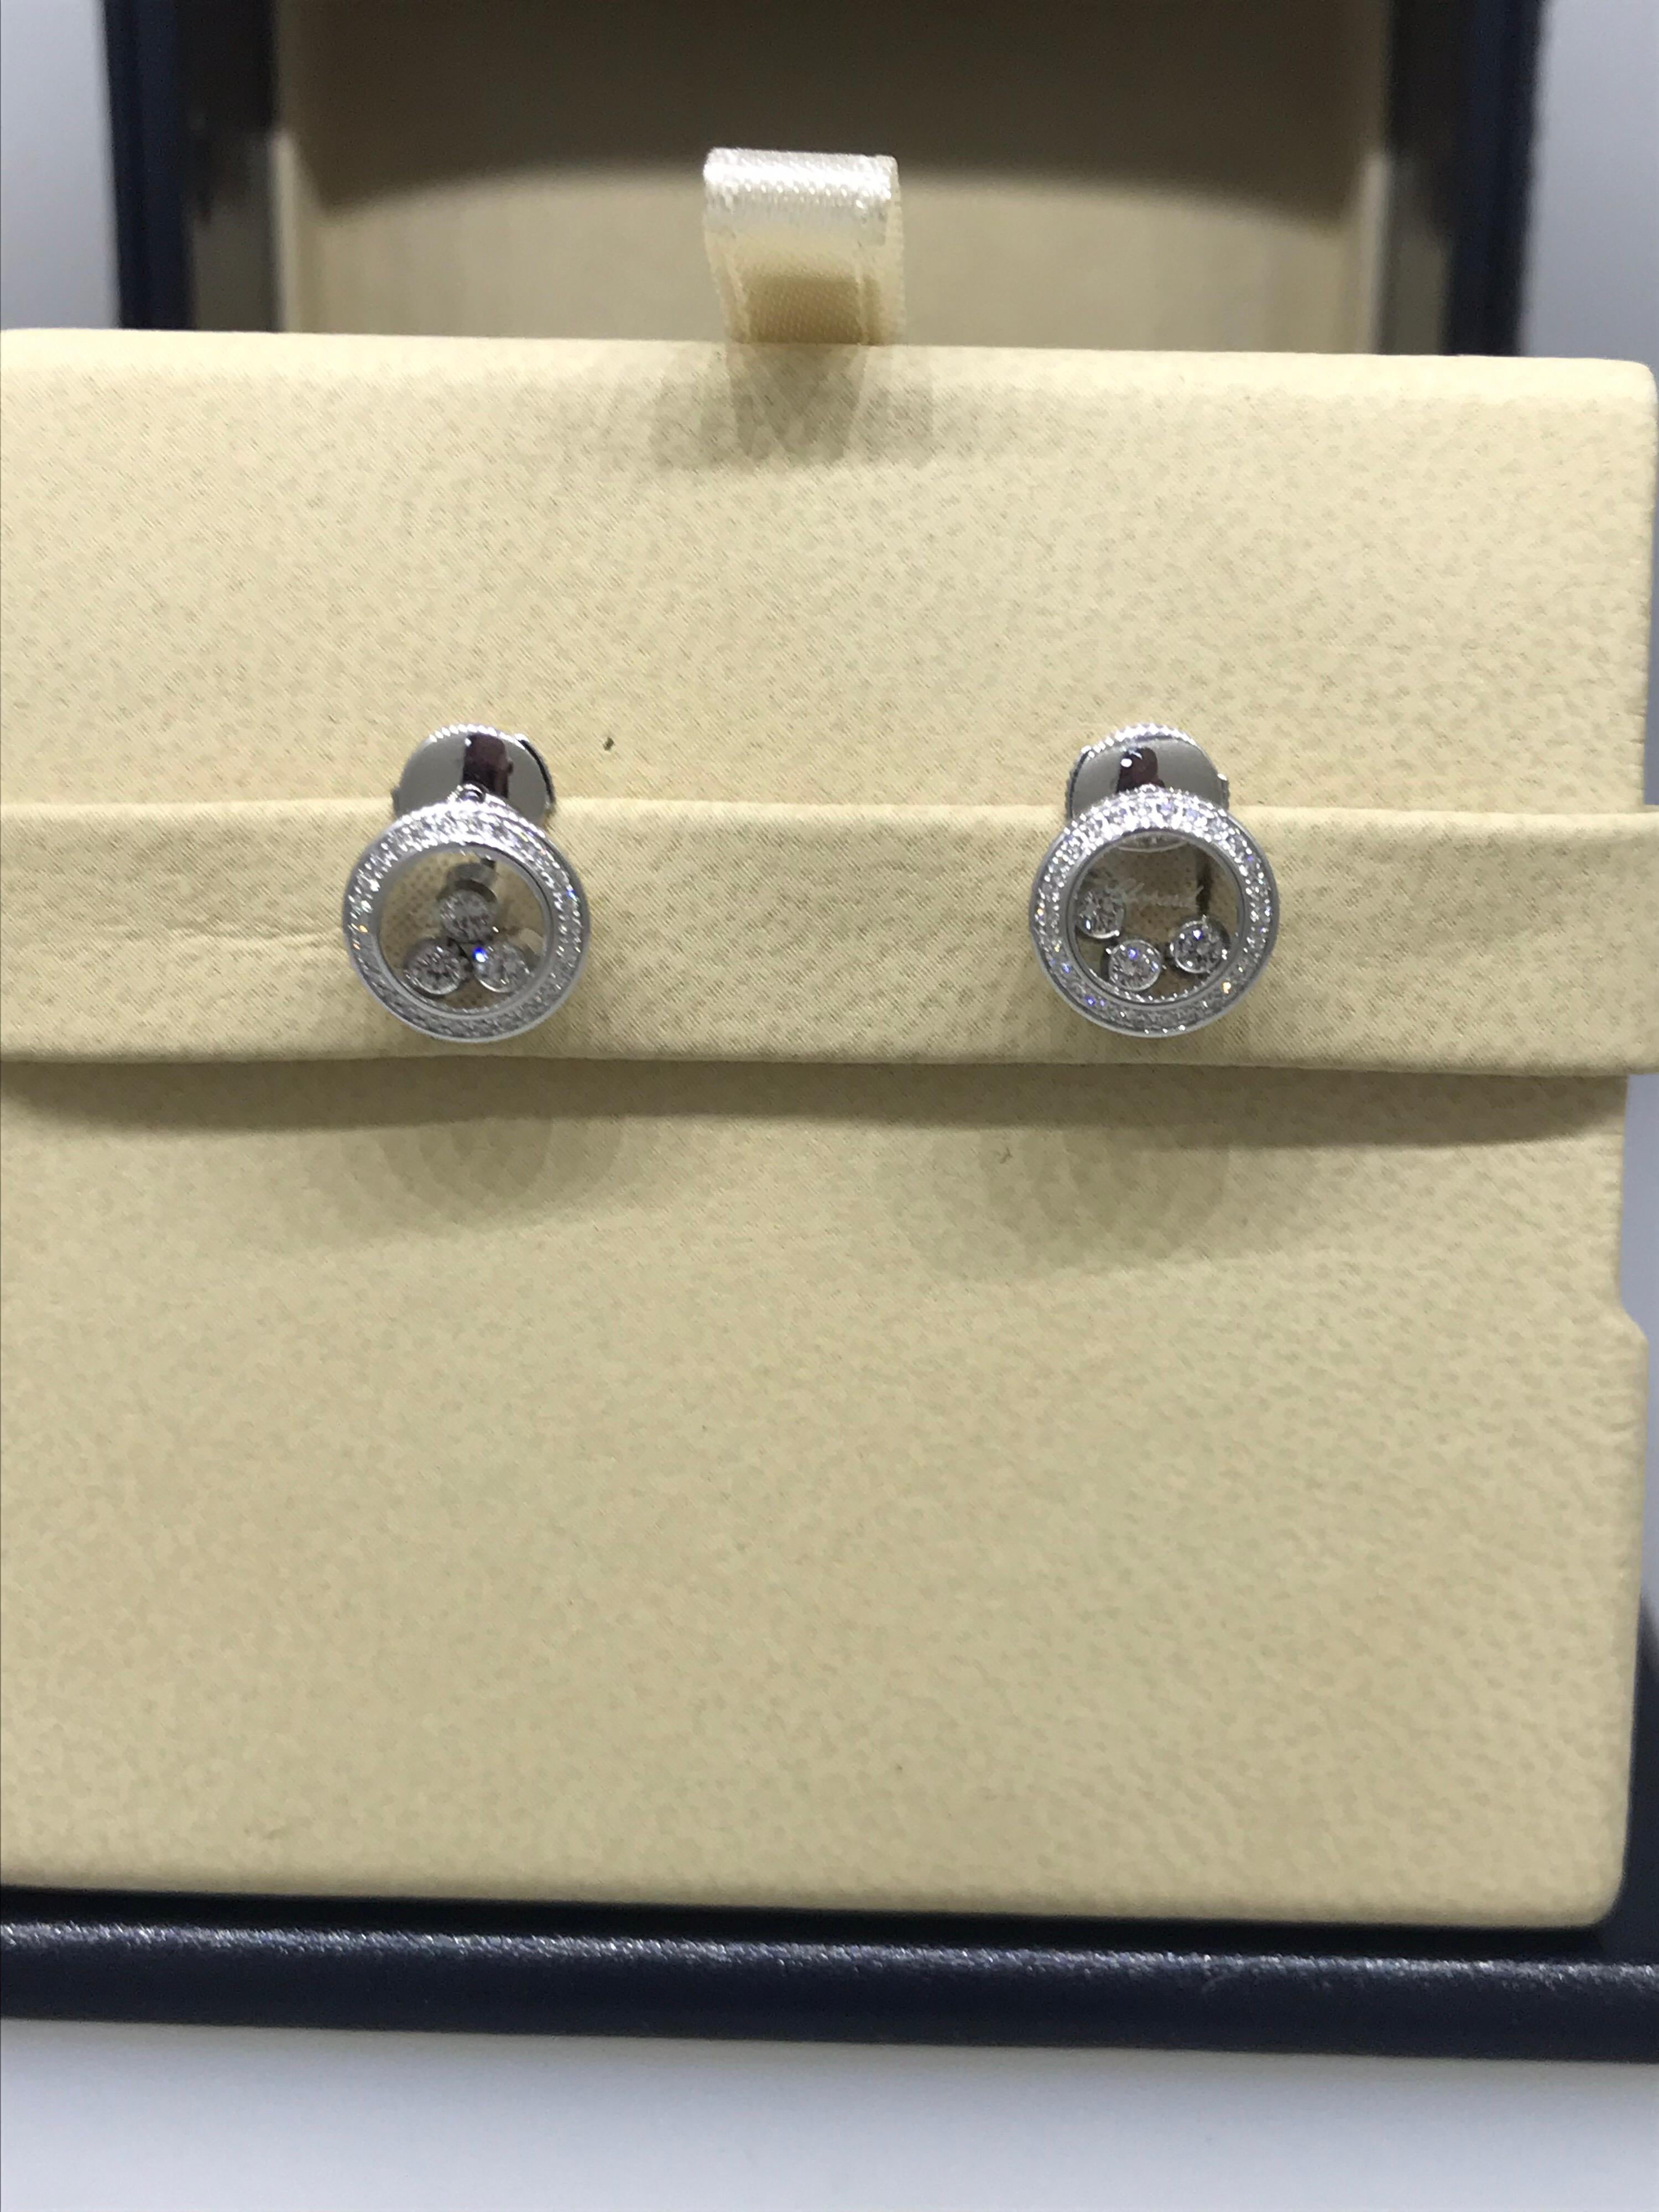 Chopard Happy Diamonds Earrings

Model Number: 83/9562-1002

100% Authentic

Brand New

Comes with original Chopard box, certificate of authenticity and warranty, and jewels manual

18 Karat white gold (4.14gr)

52 Diamonds on the Earrings (.15